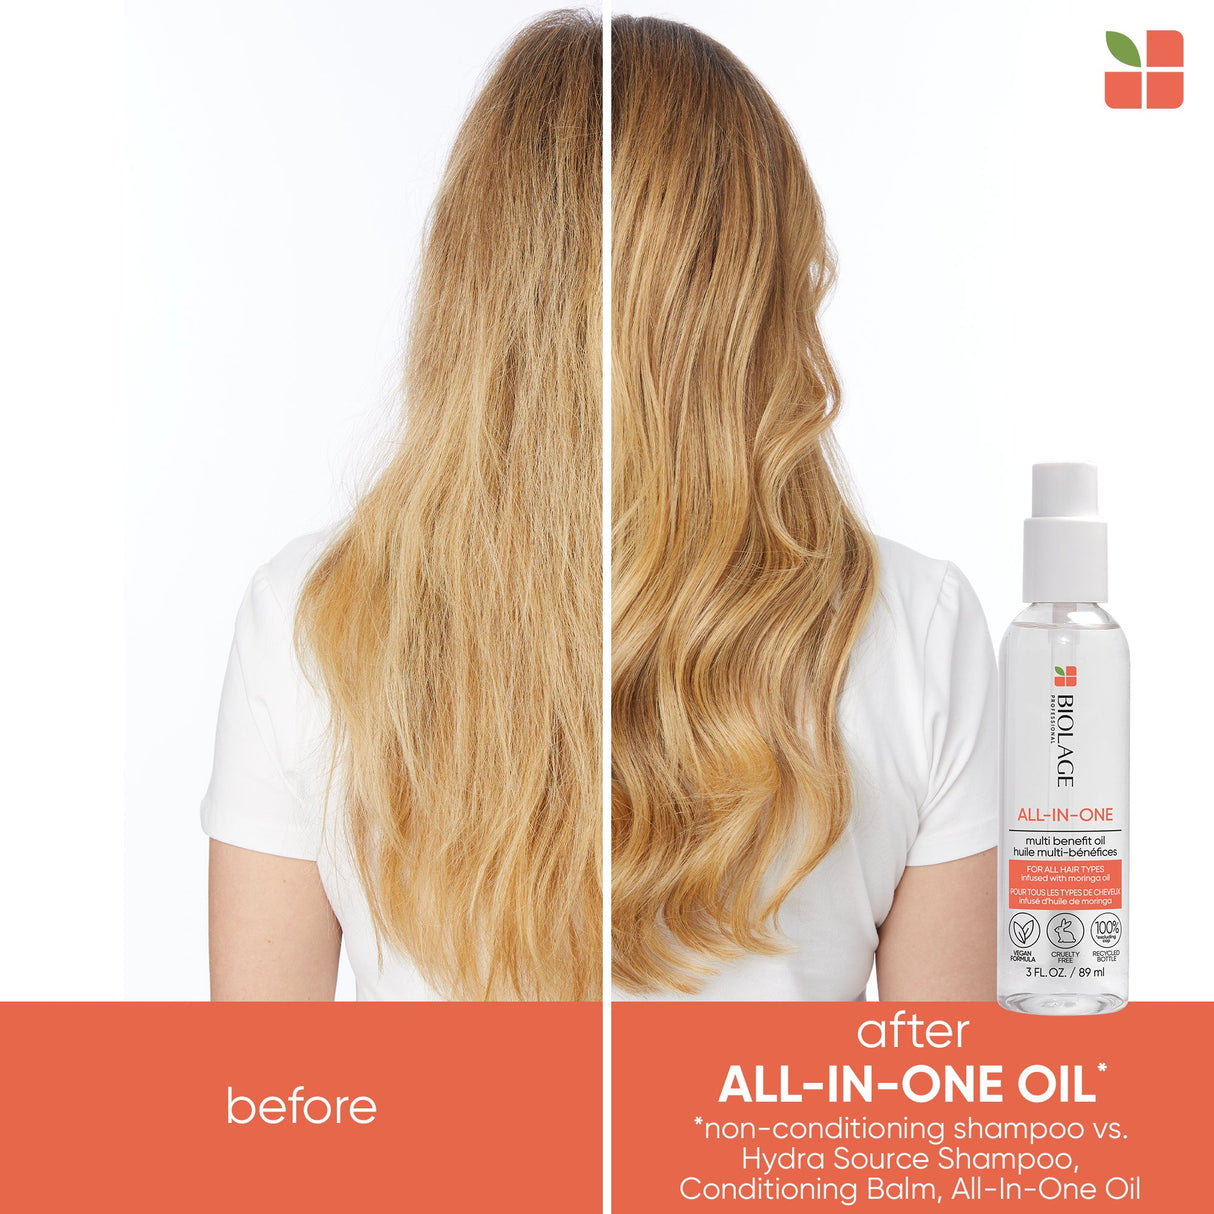 All-In-One Multi-Benefit Oil-Biolage